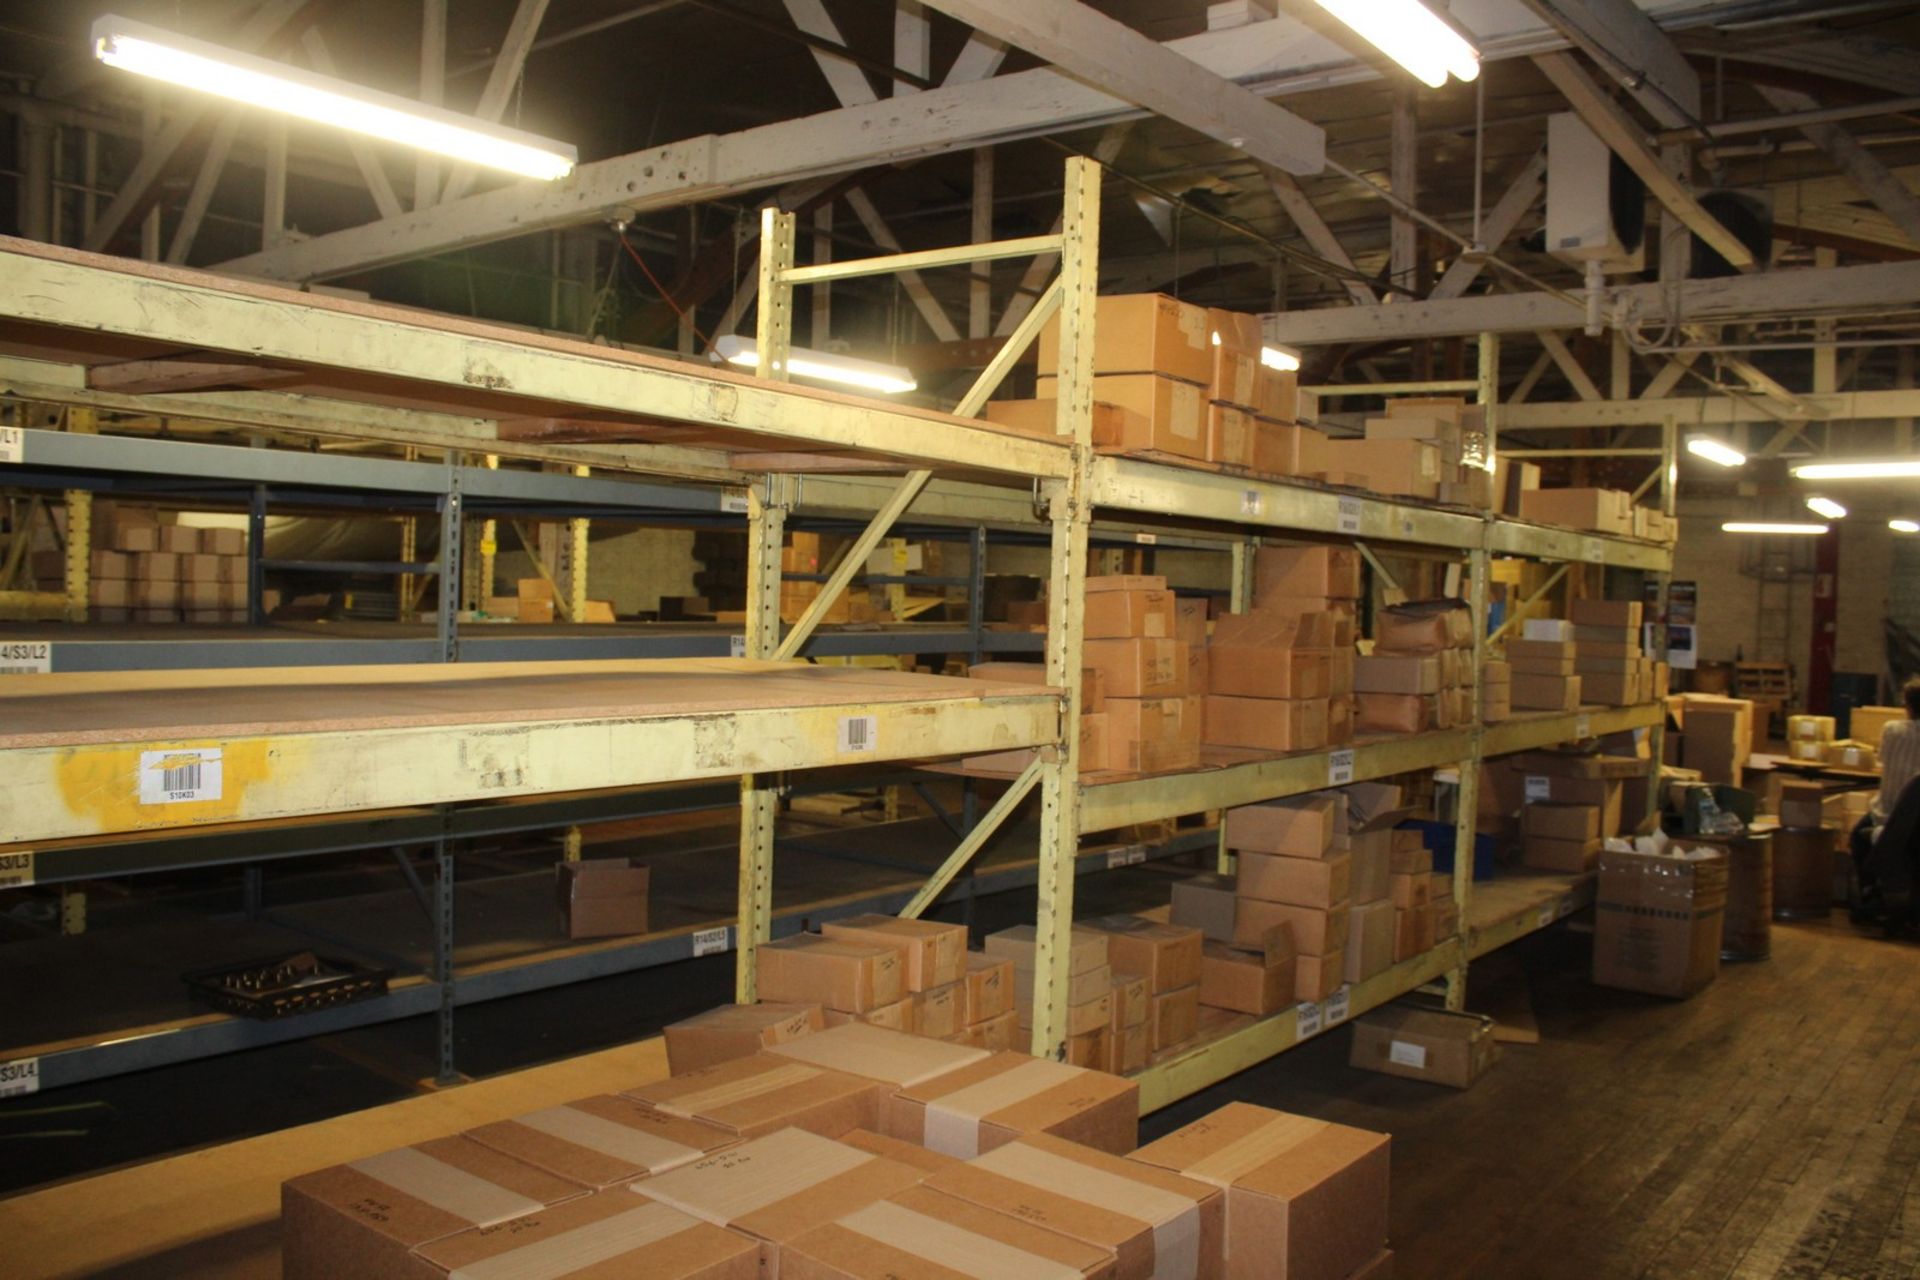 (3) SECTIONS OF ADJUSTABLE PALLET RACKING 8'X40"X8'